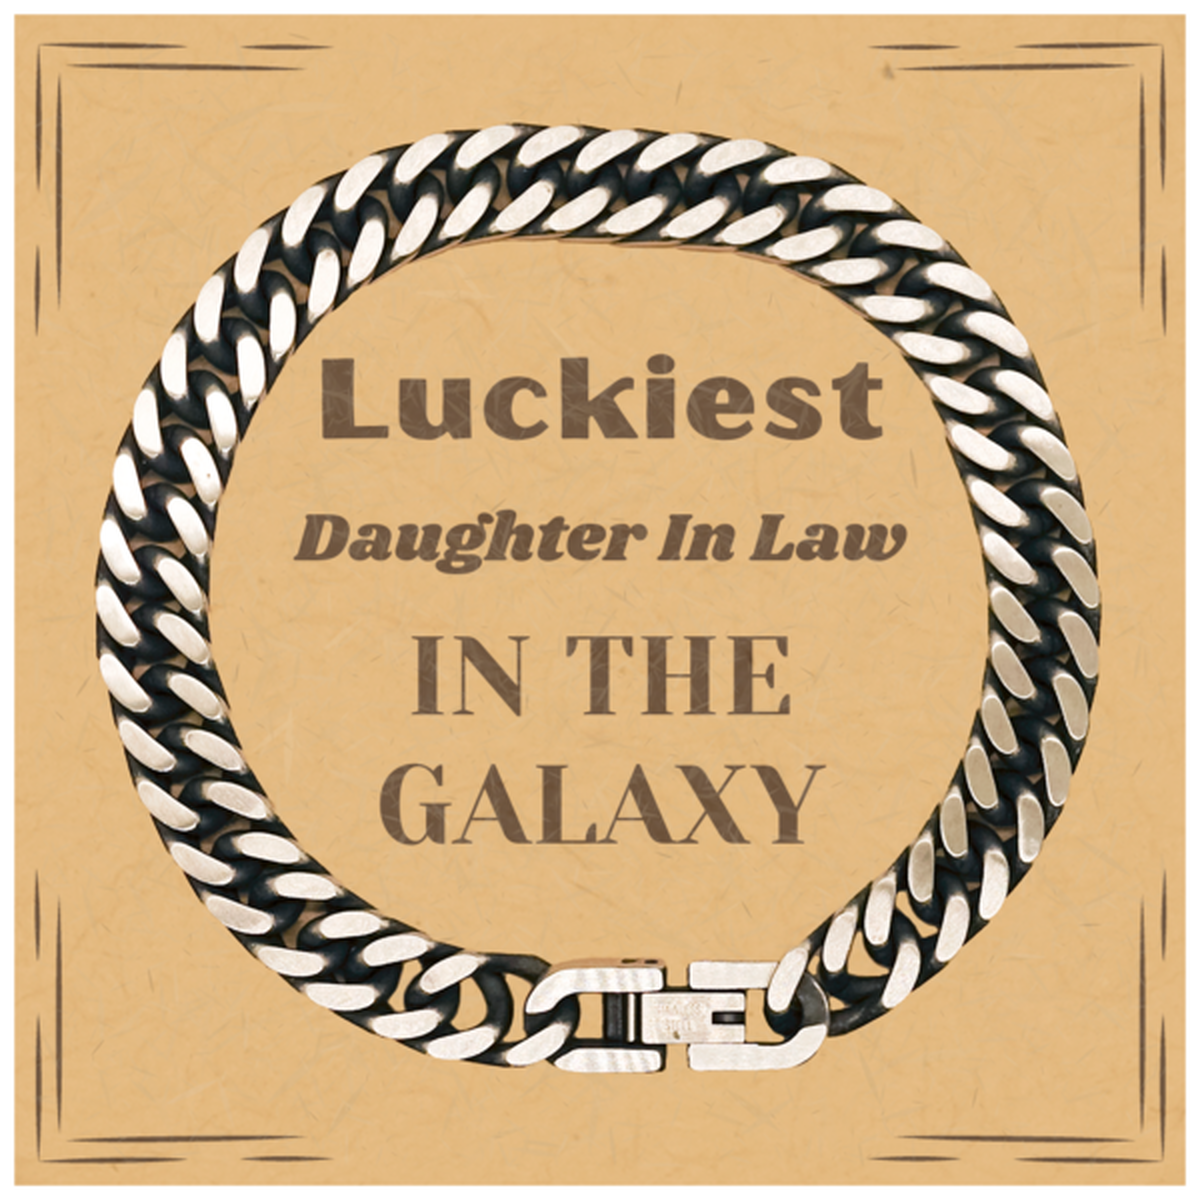 Luckiest Daughter In Law in the Galaxy, To My Daughter In Law Message Card Gifts, Christmas Daughter In Law Cuban Link Chain Bracelet Gifts, X-mas Birthday Unique Gifts For Daughter In Law Men Women